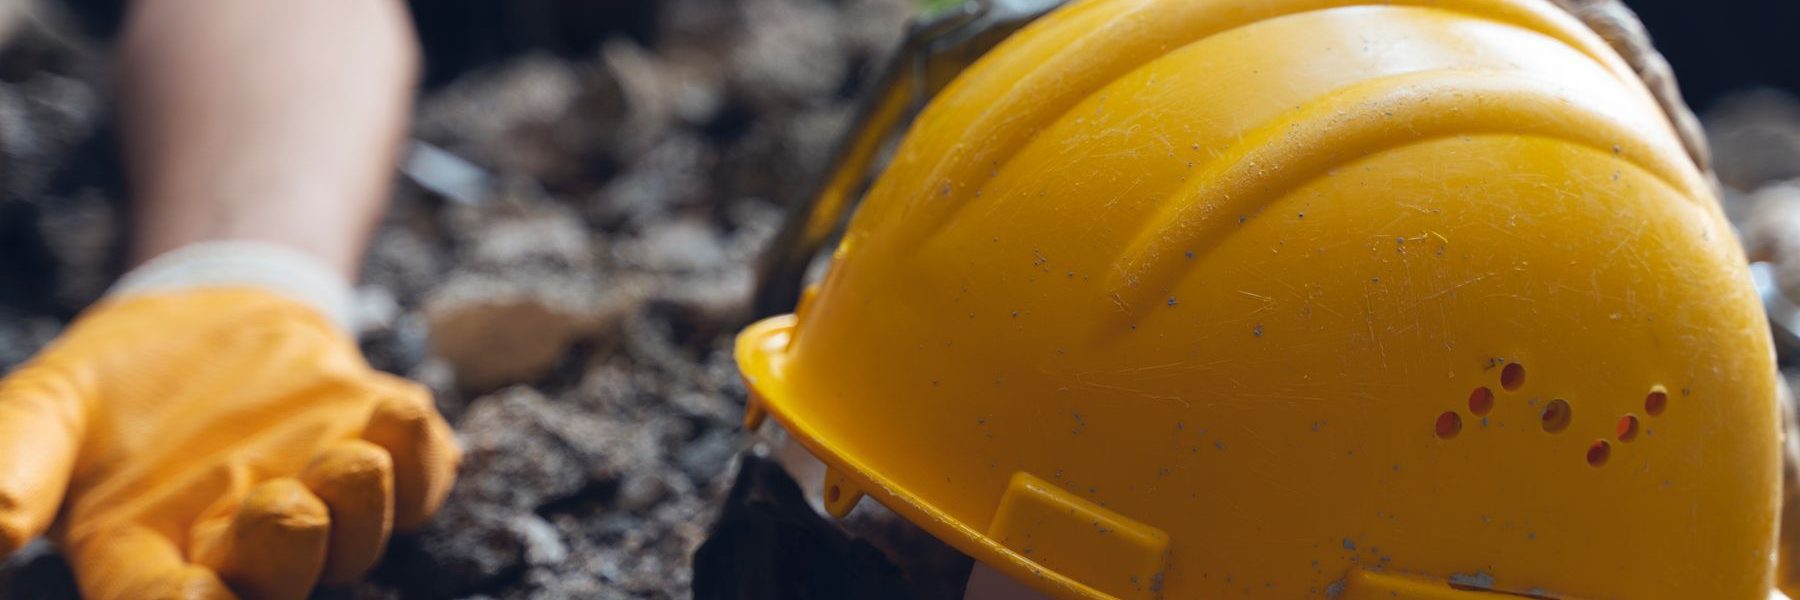 What You Need to Know About Construction Accidents